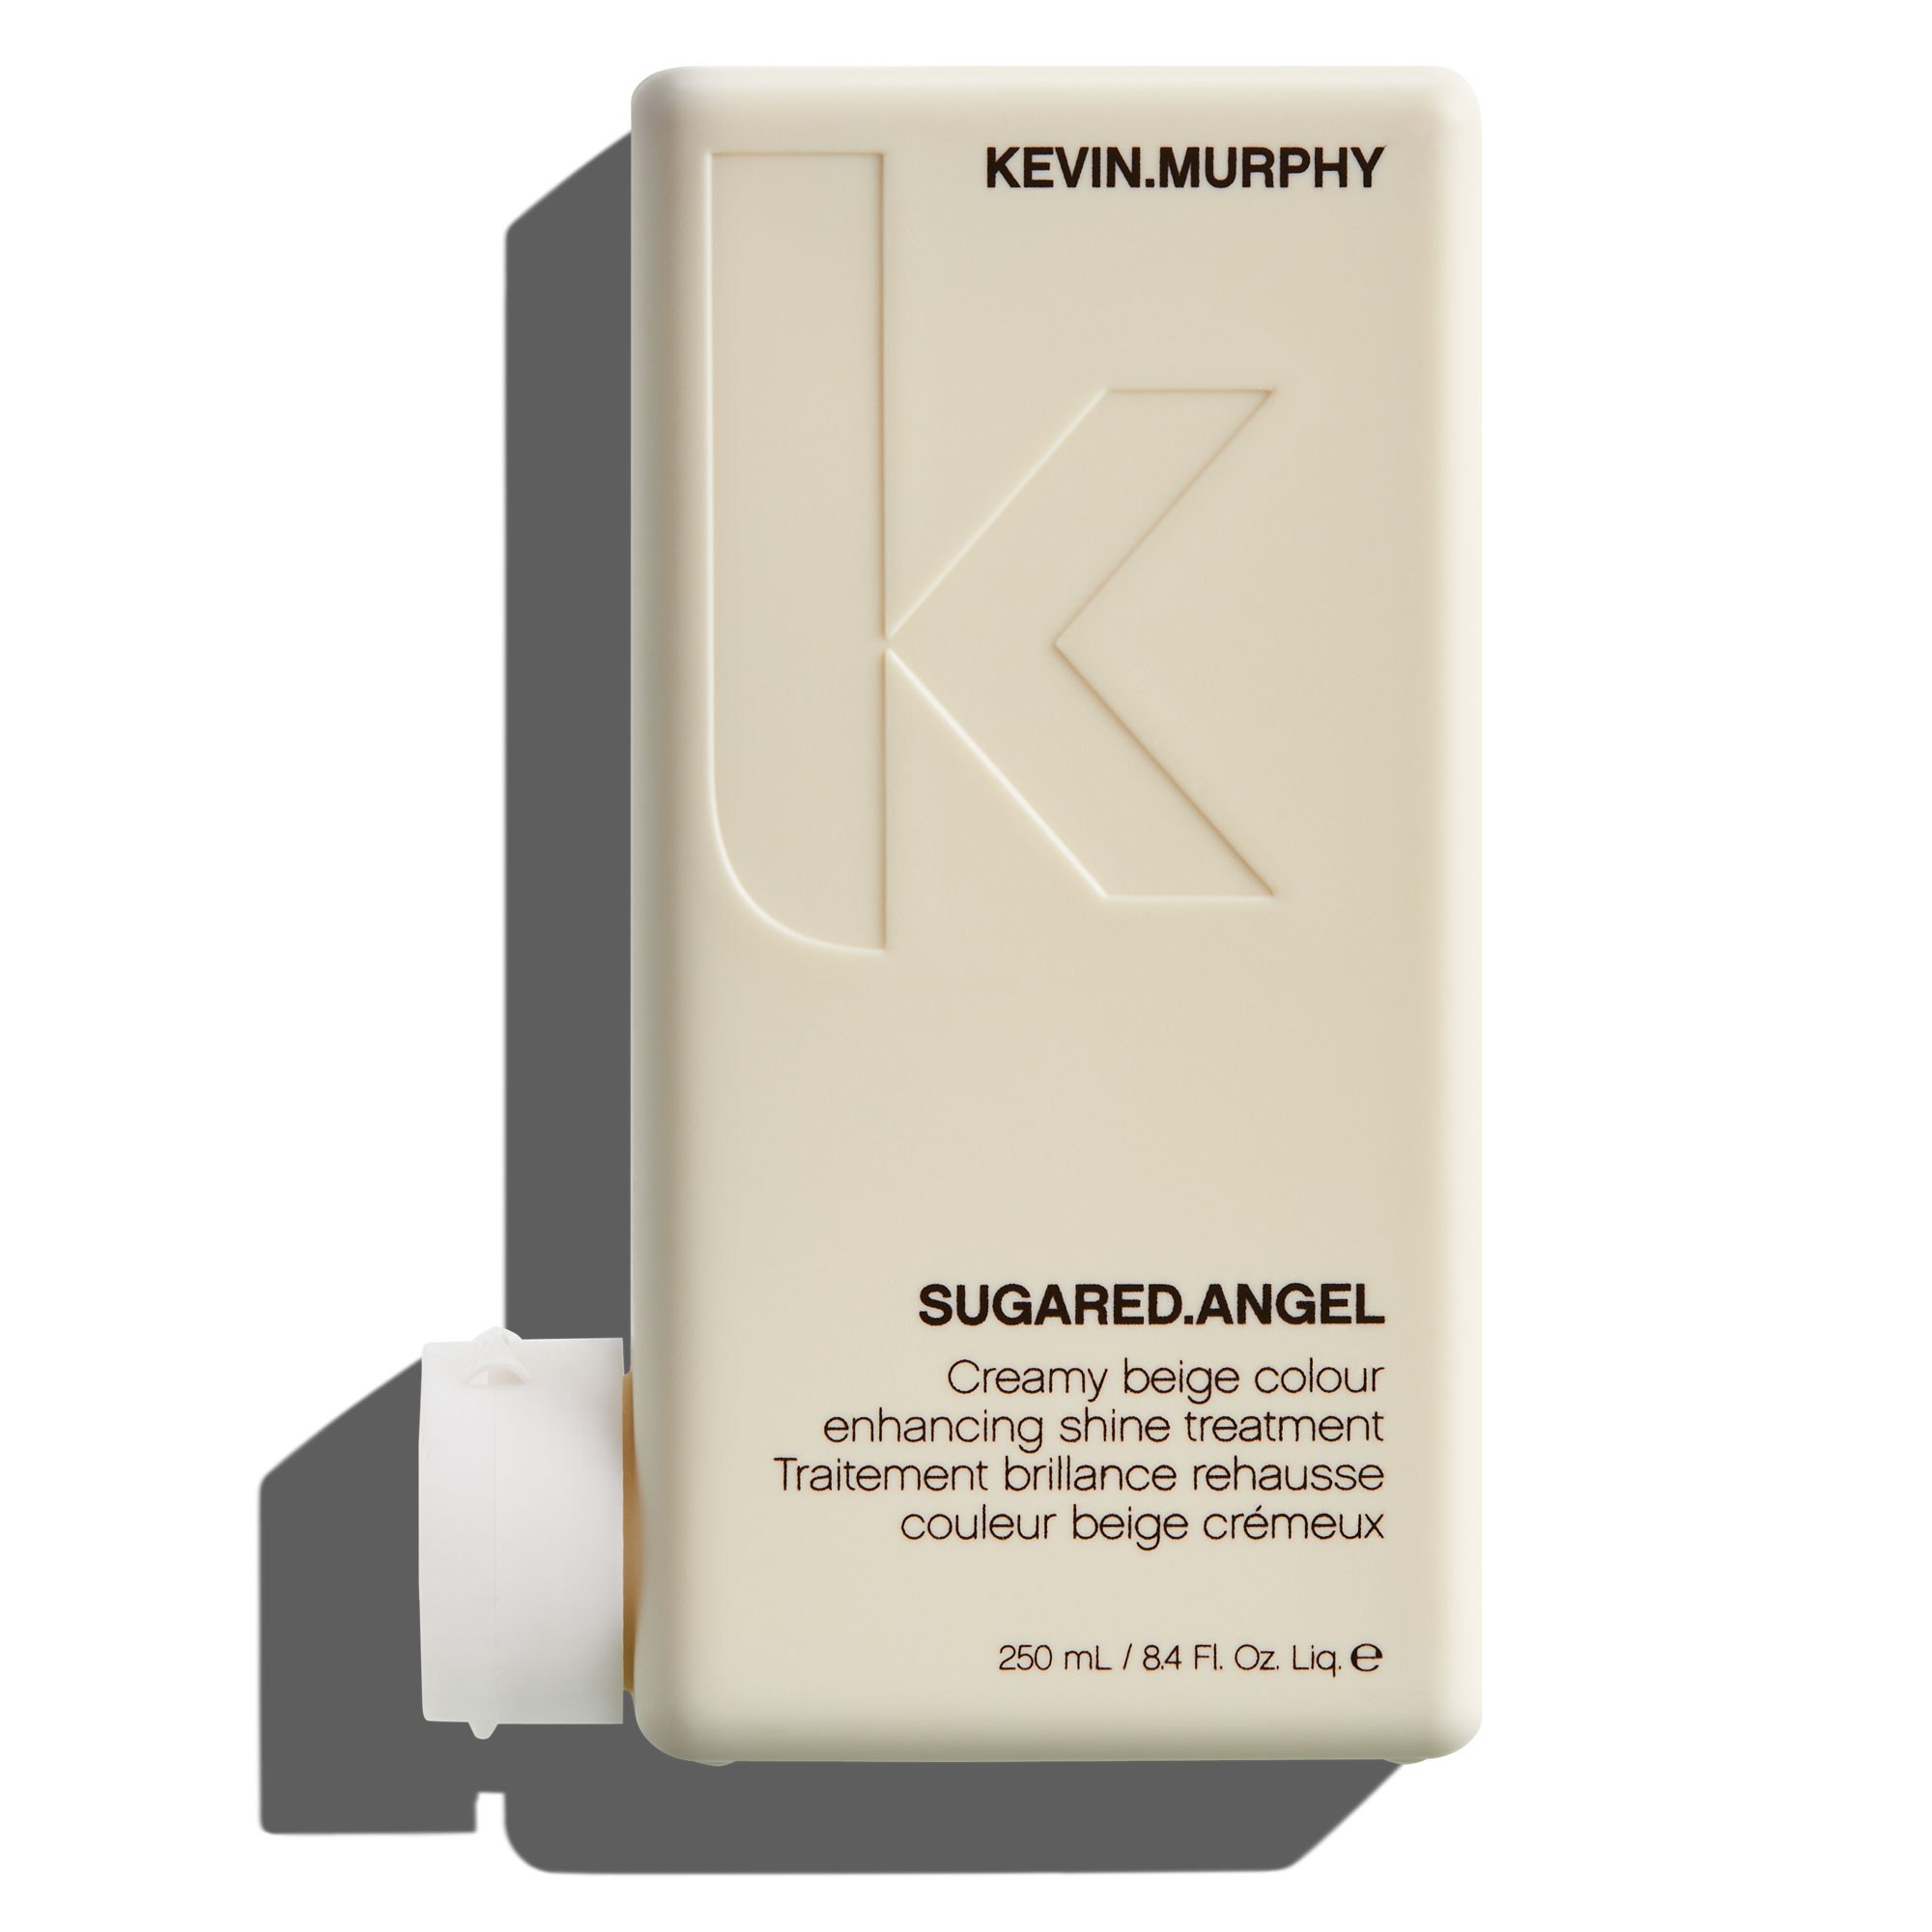 KEVIN.MURPHY SUGARED.ANGEL 8.4oz